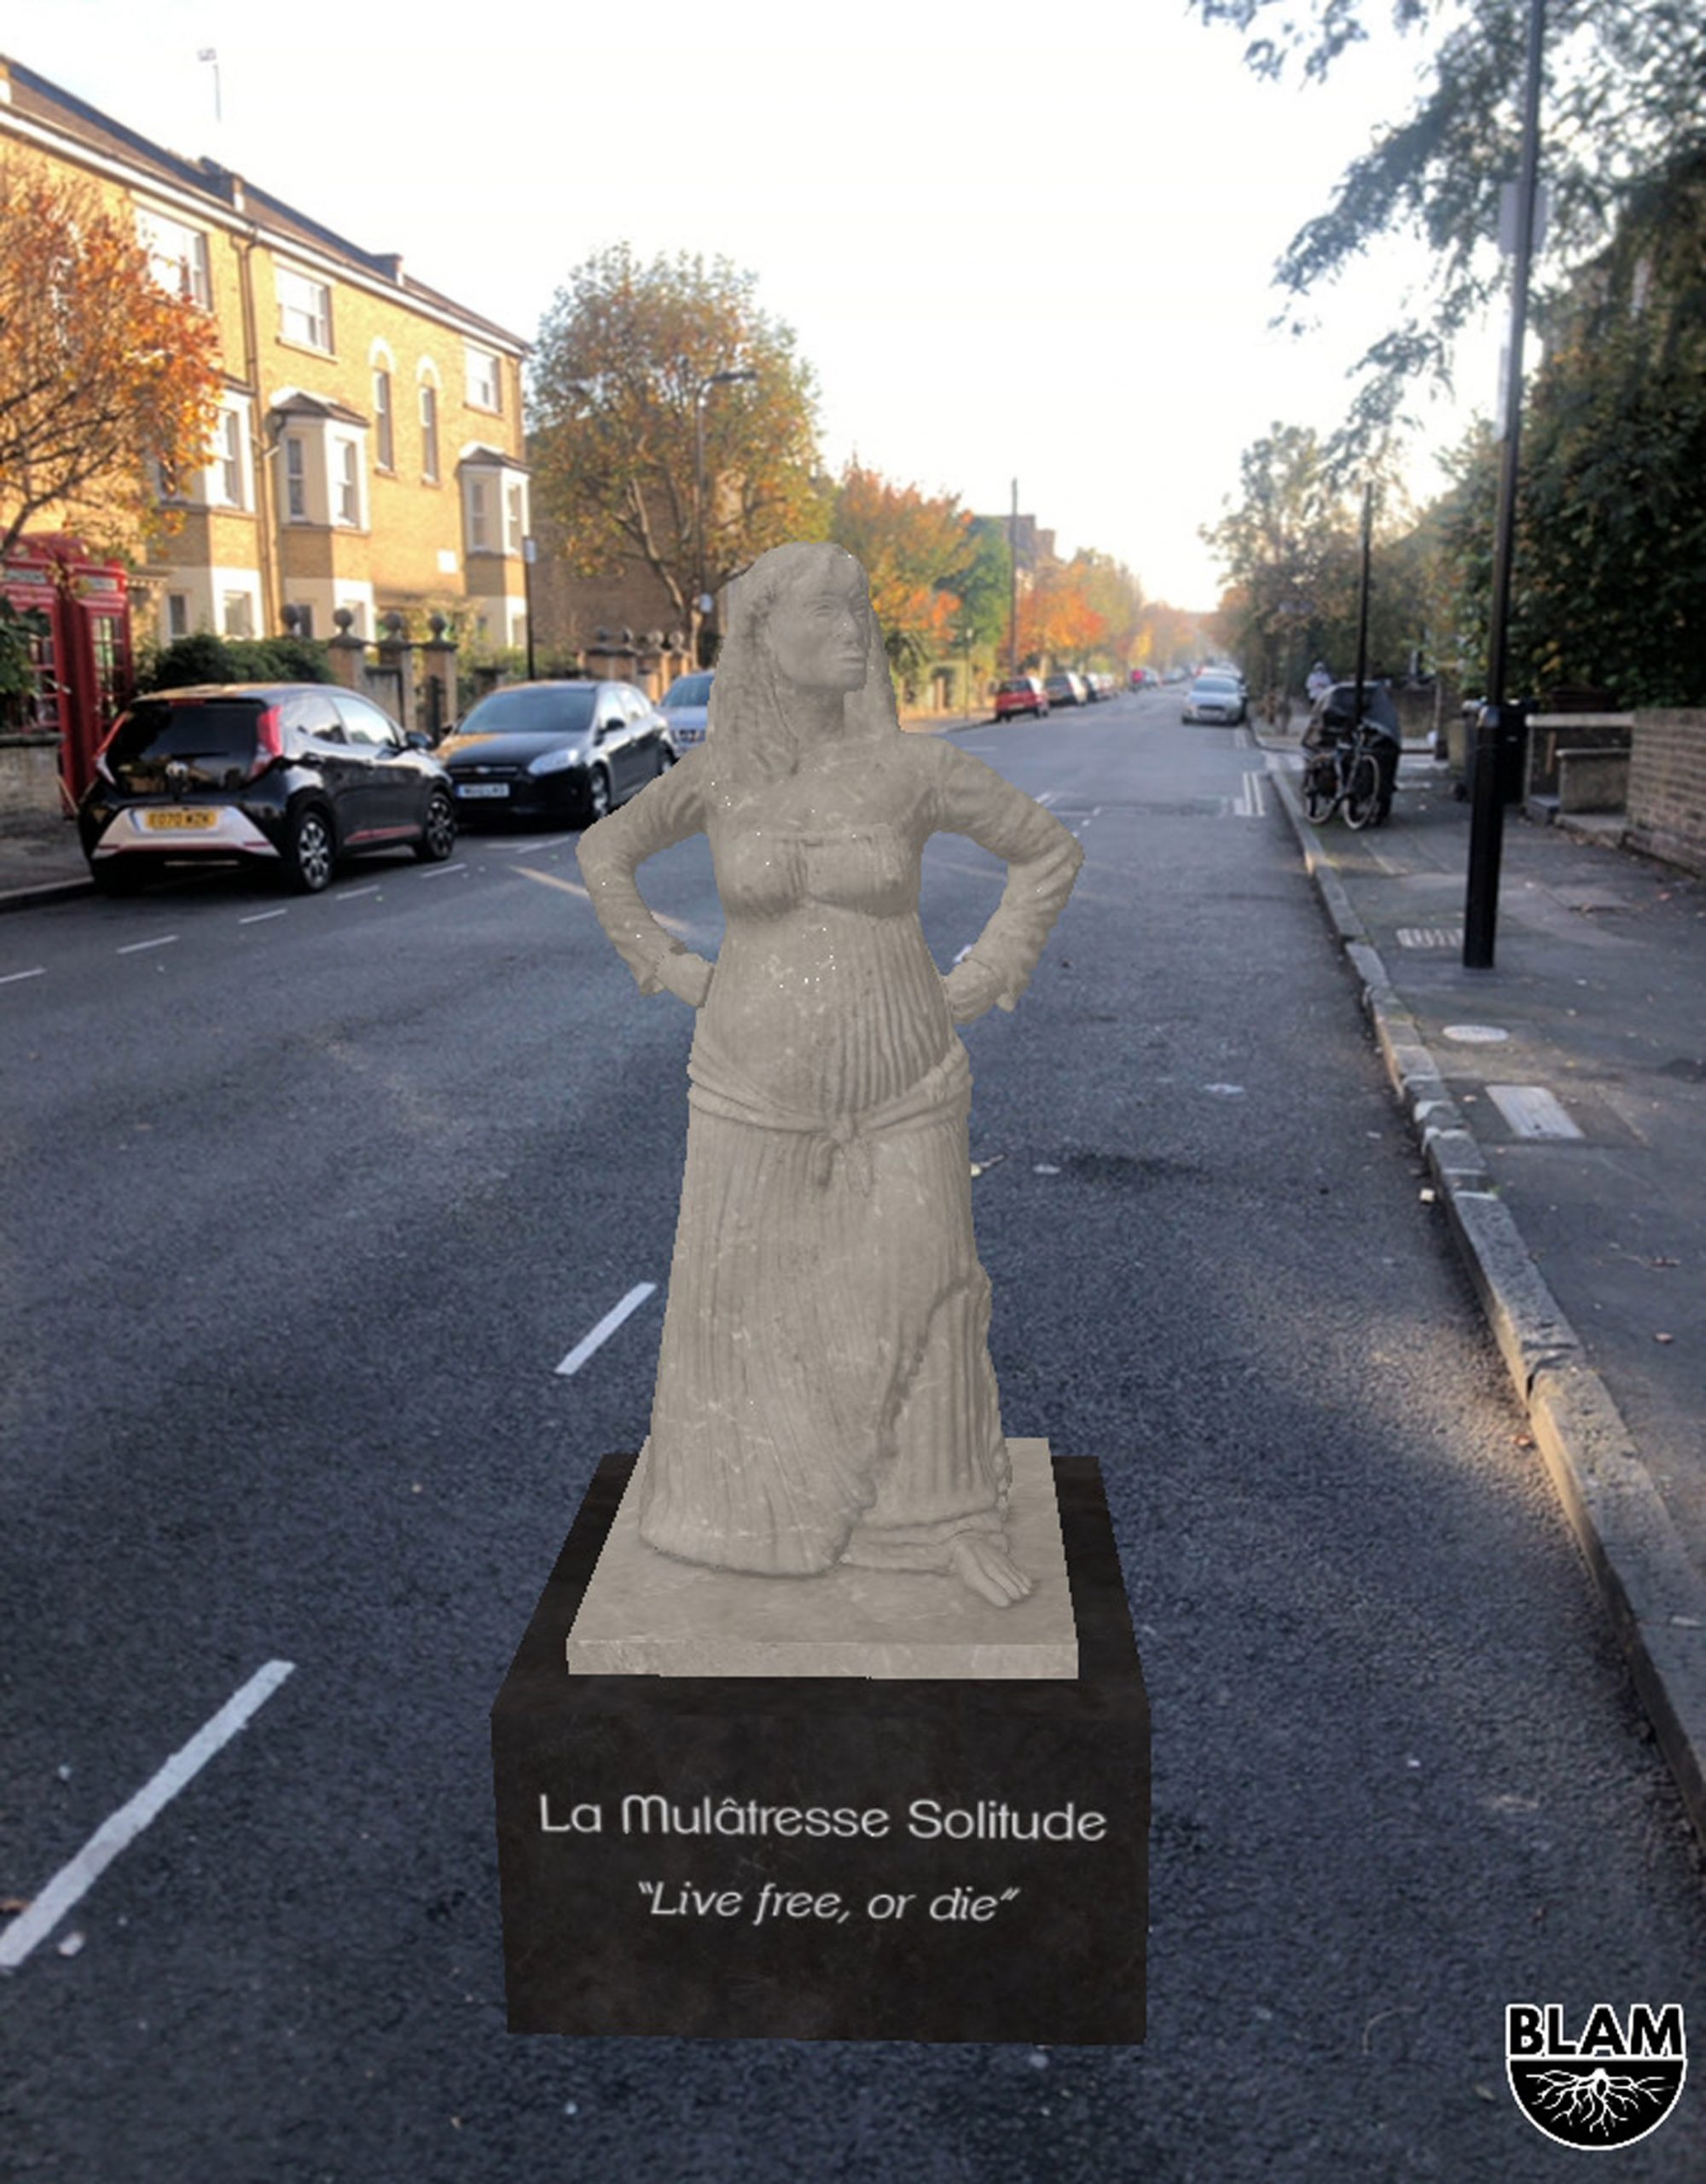 An AR statue of La Mulâtresse Solitude from the BLAM Black history app